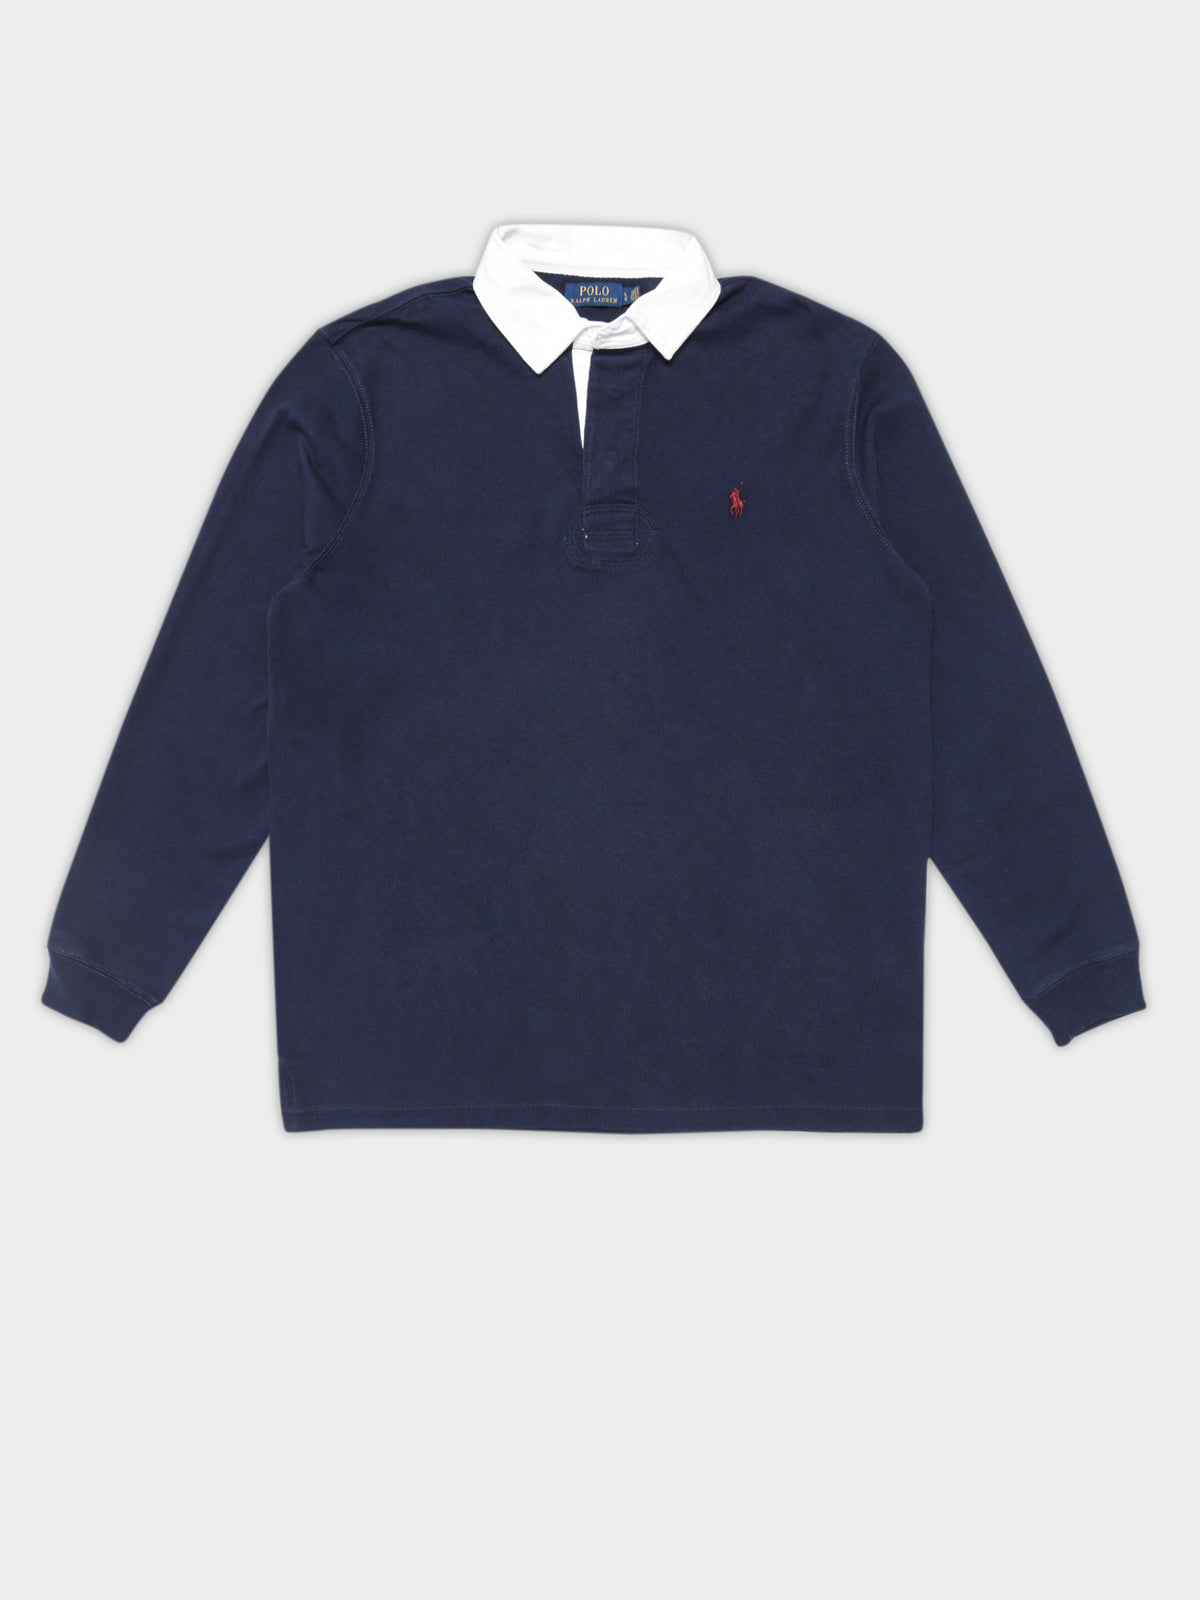 Rugby Shirt in Navy